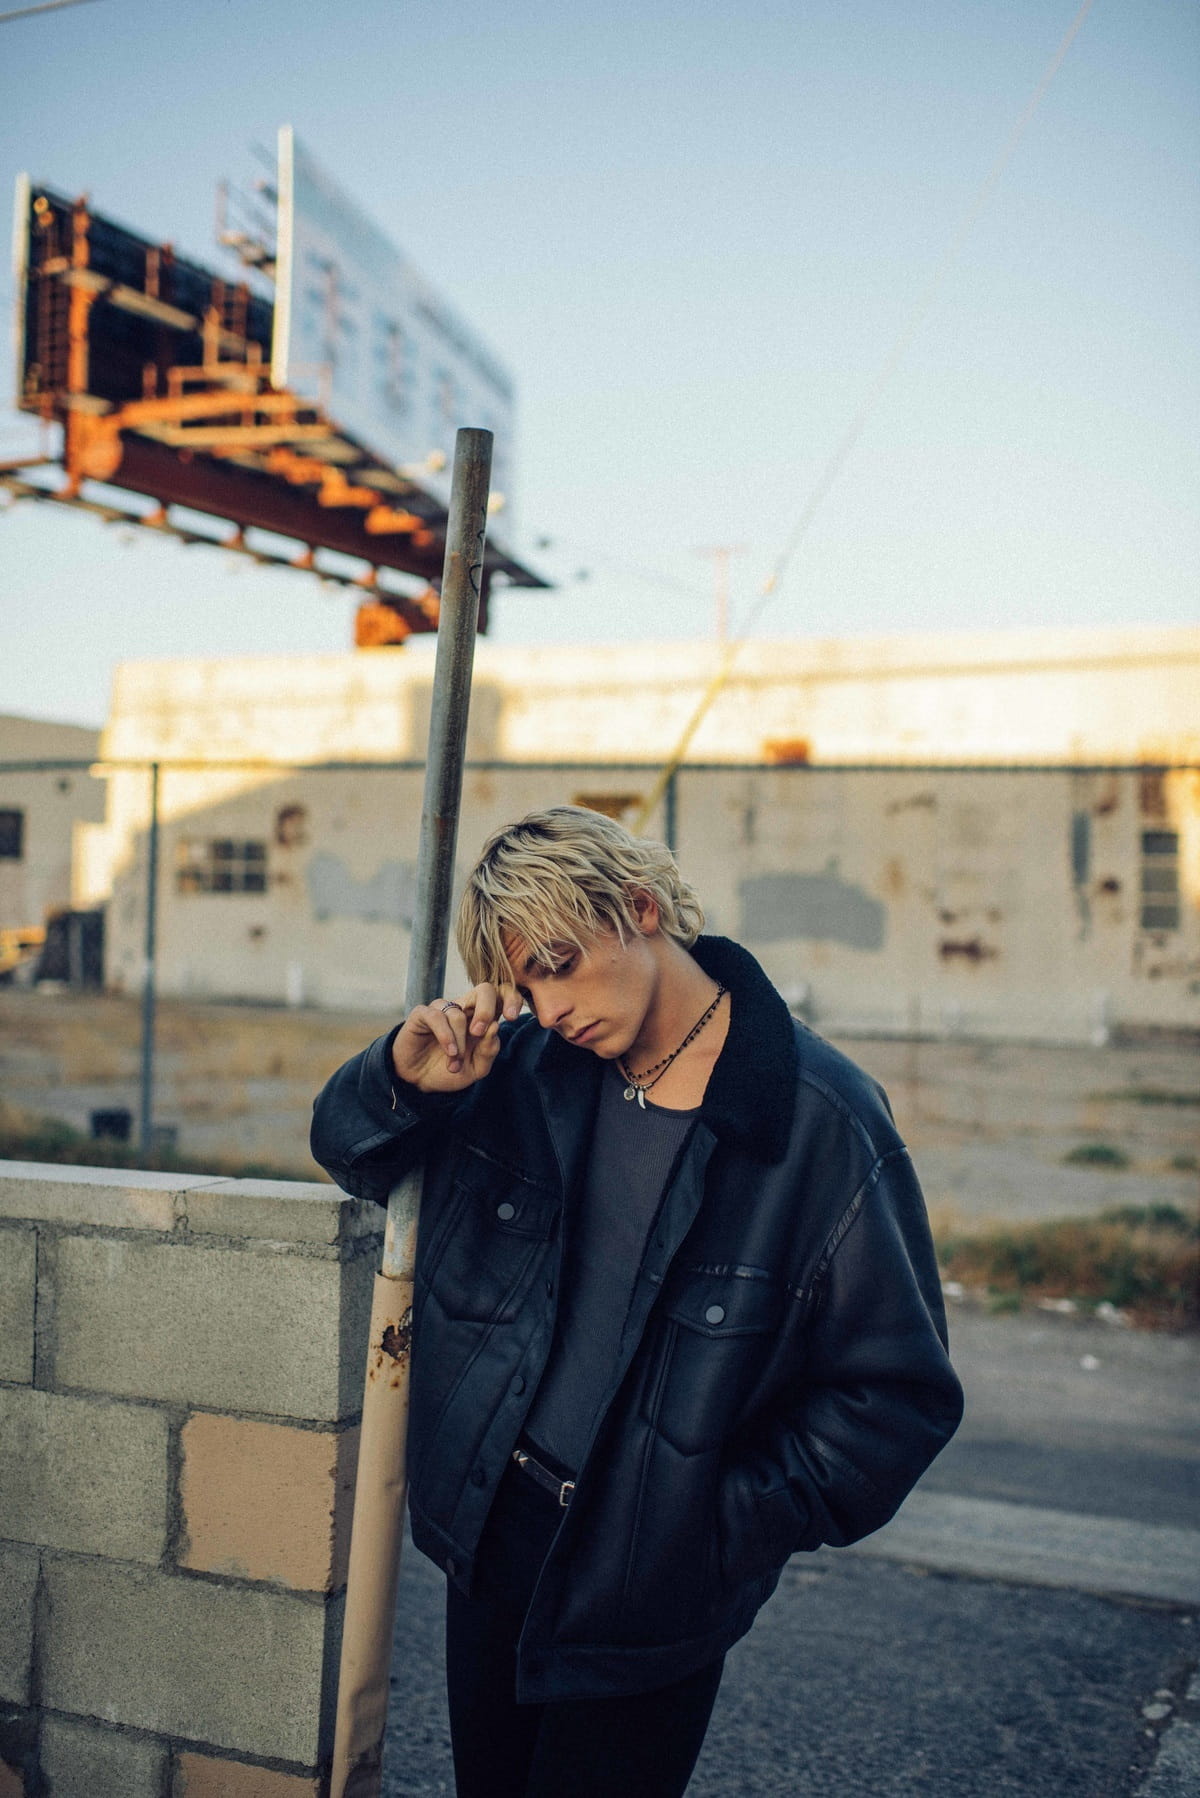 Black leather jacket by Alexander Wang, tank top by Calvin Klein, jeans by Agolde, belt by Palace Costume. Actor: Ross Lynch. Stylist: Sean Knight. Hair Stylist: Lucy Halperin